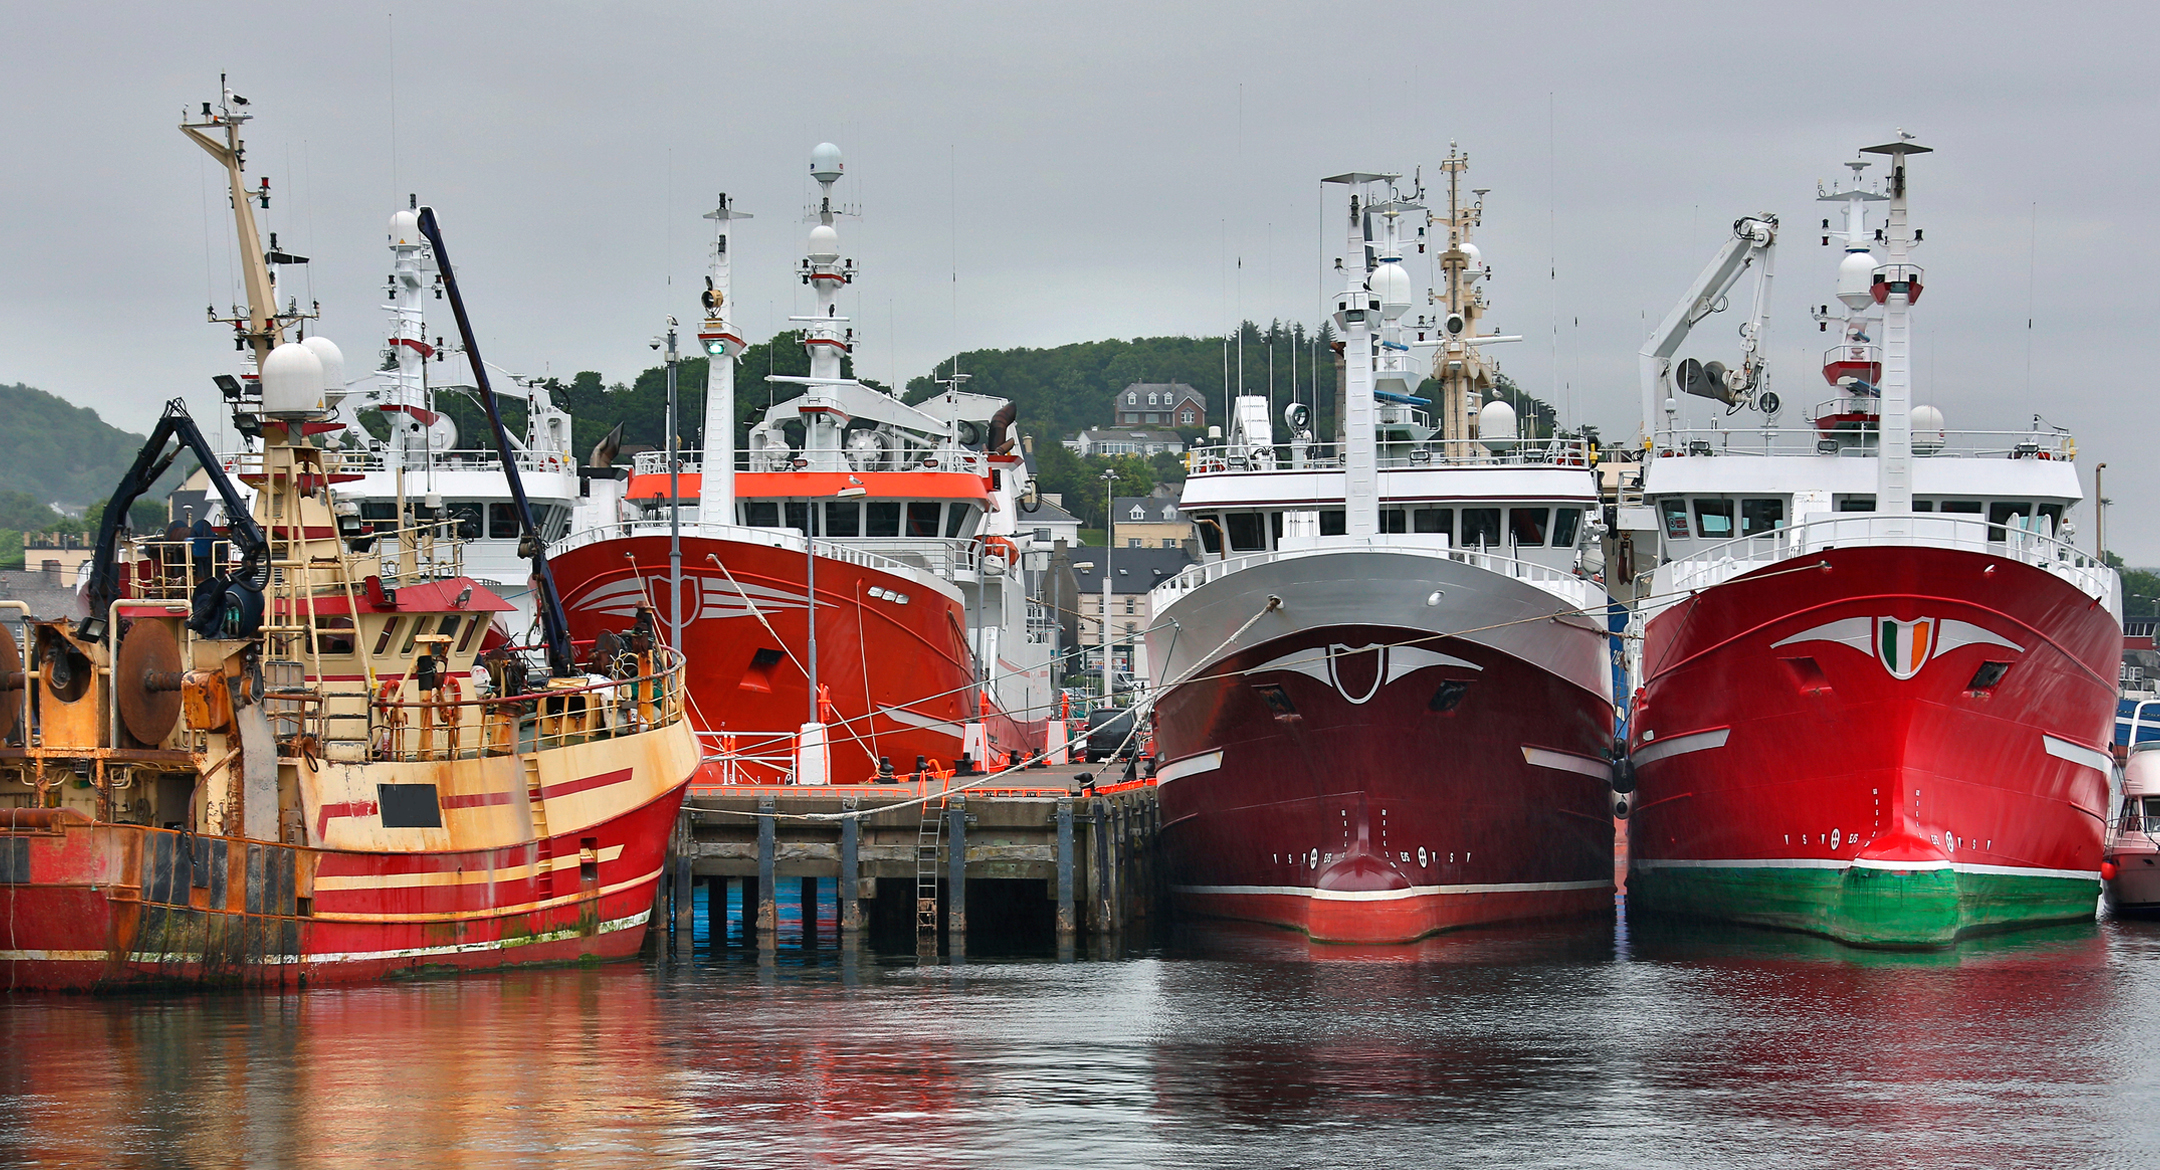  Commercial fishing trawlers in the town of Killybegs in County Donegal, Ireland.  Credit: Steve Allen/Shutterstock.com